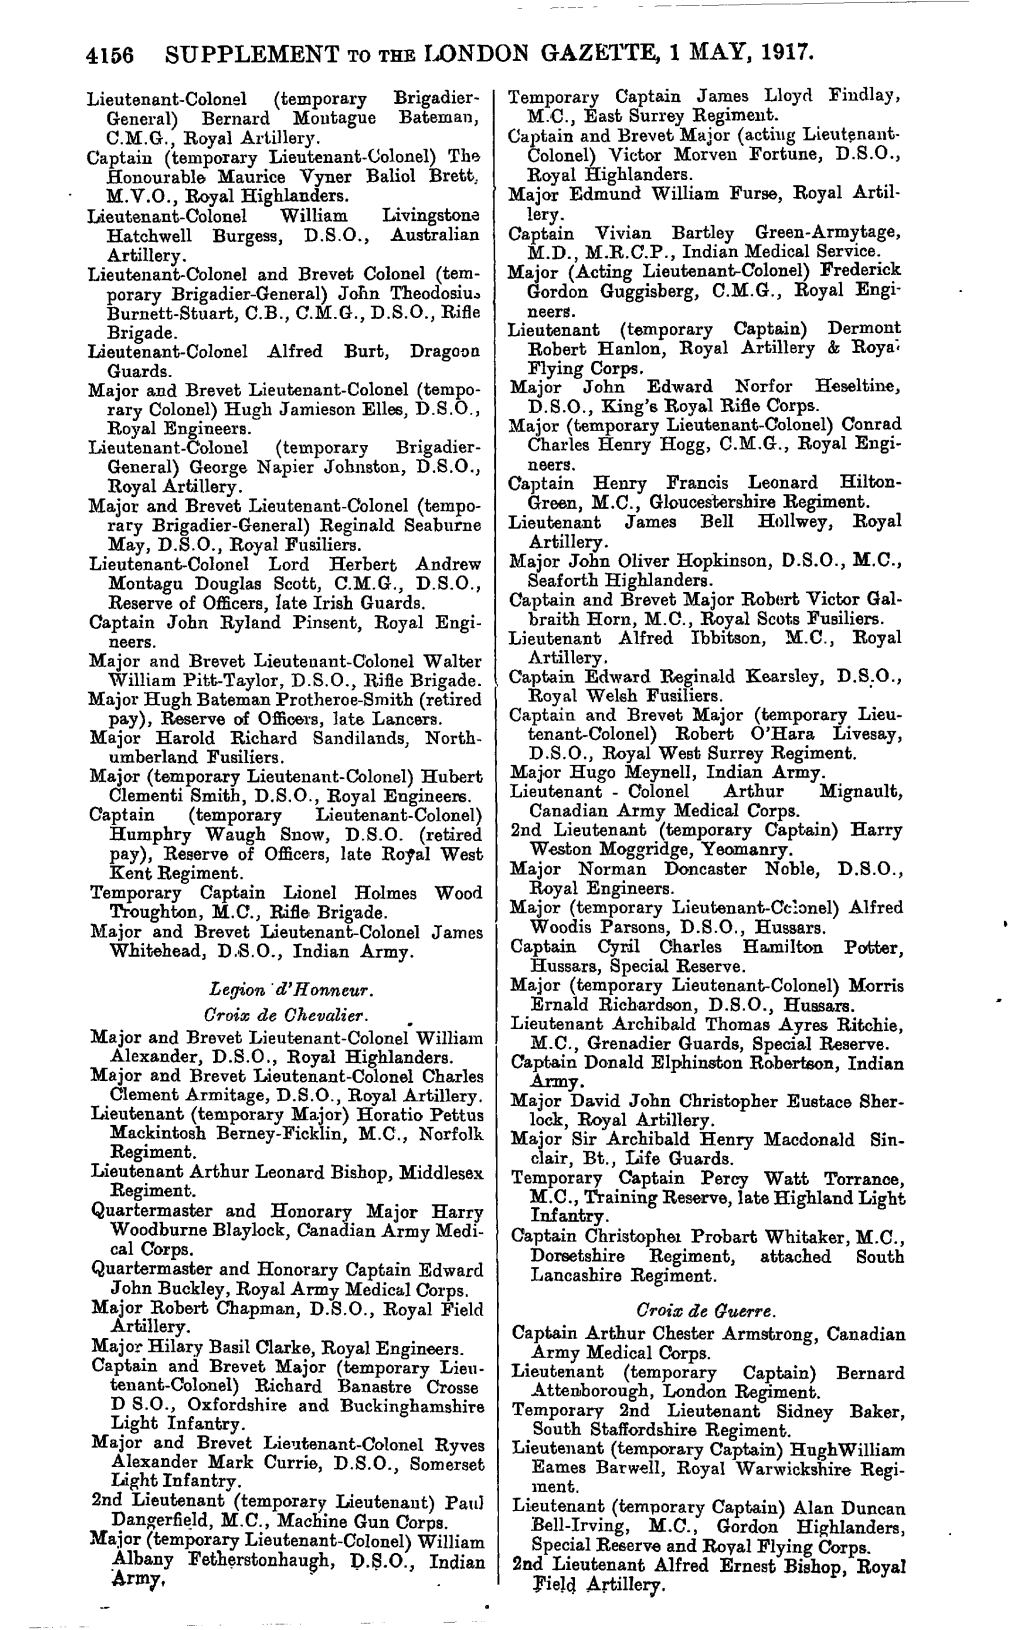 4156 Supplement to the London Gazette, 1 May, 1917